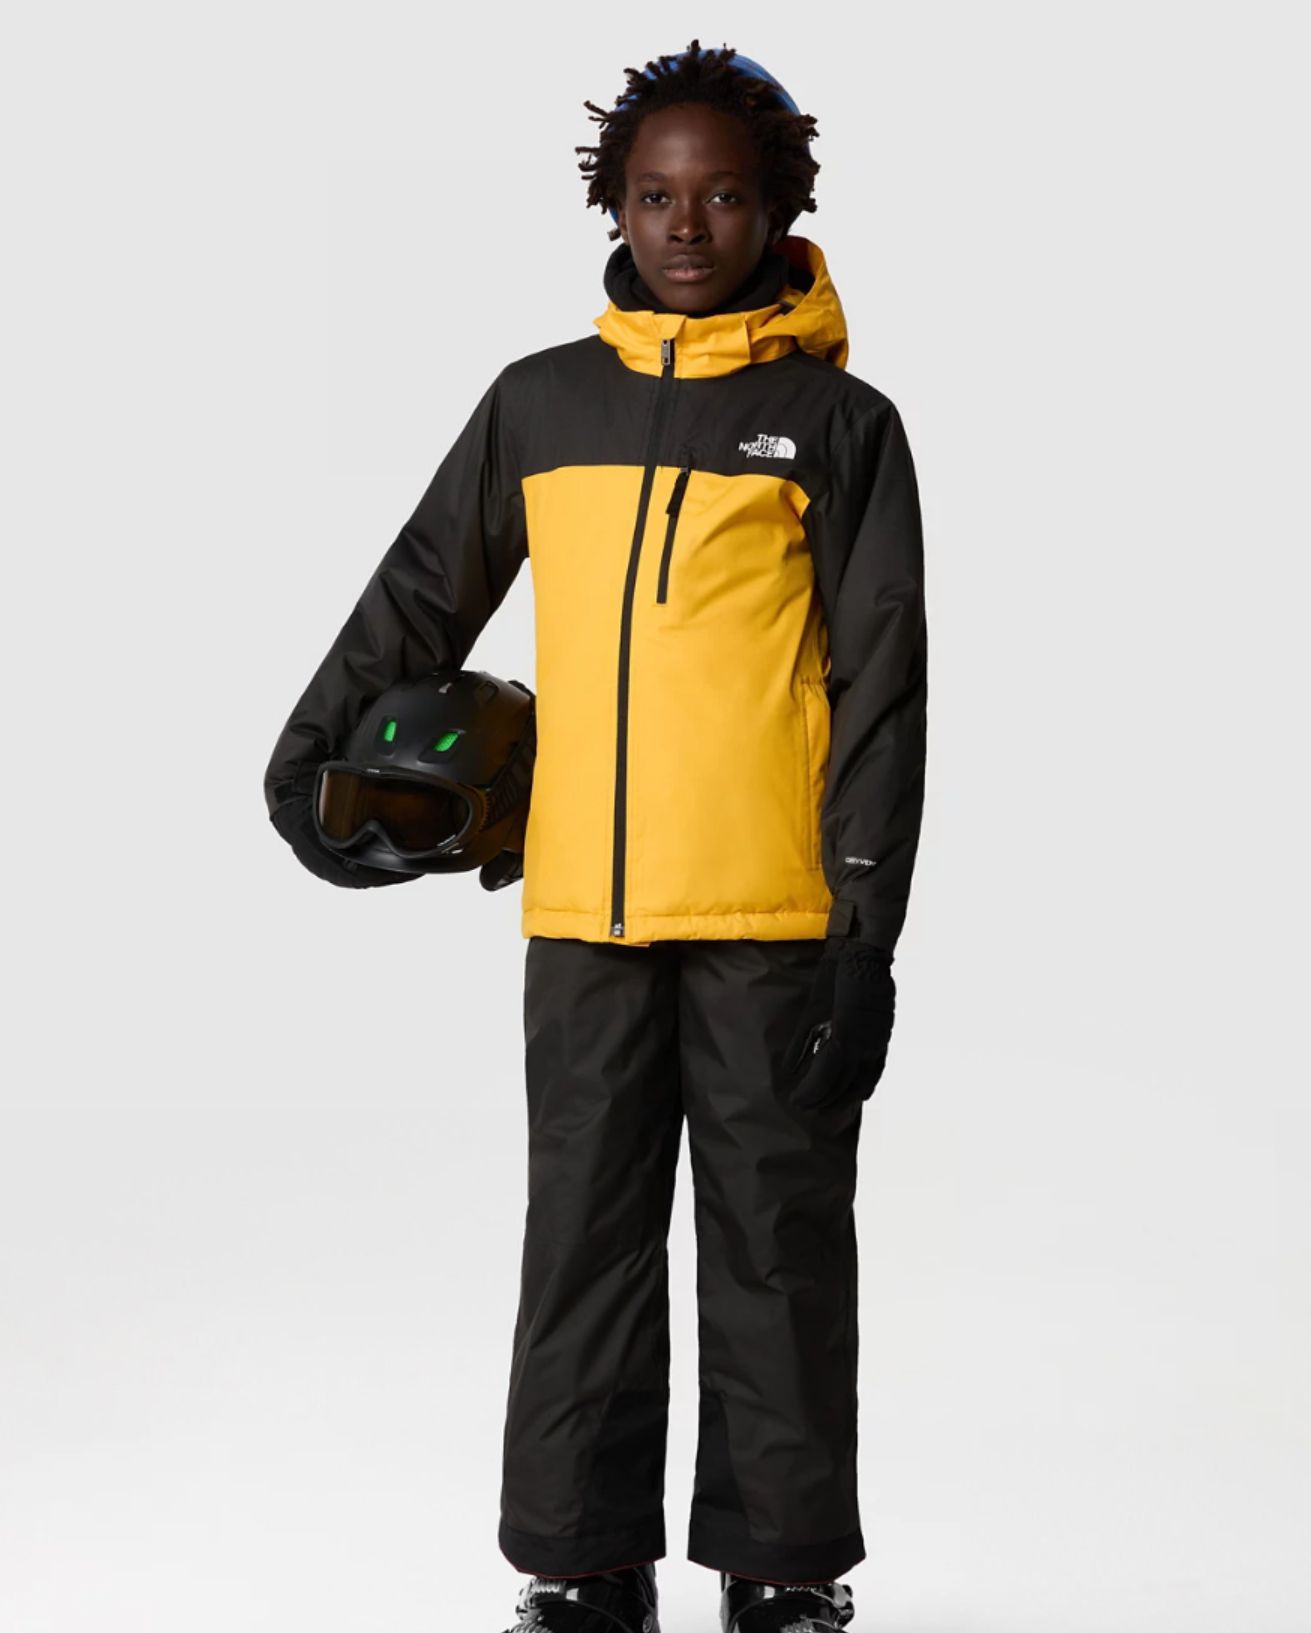 Teenage boy in yellow and black jacket holding a helmet_North Face